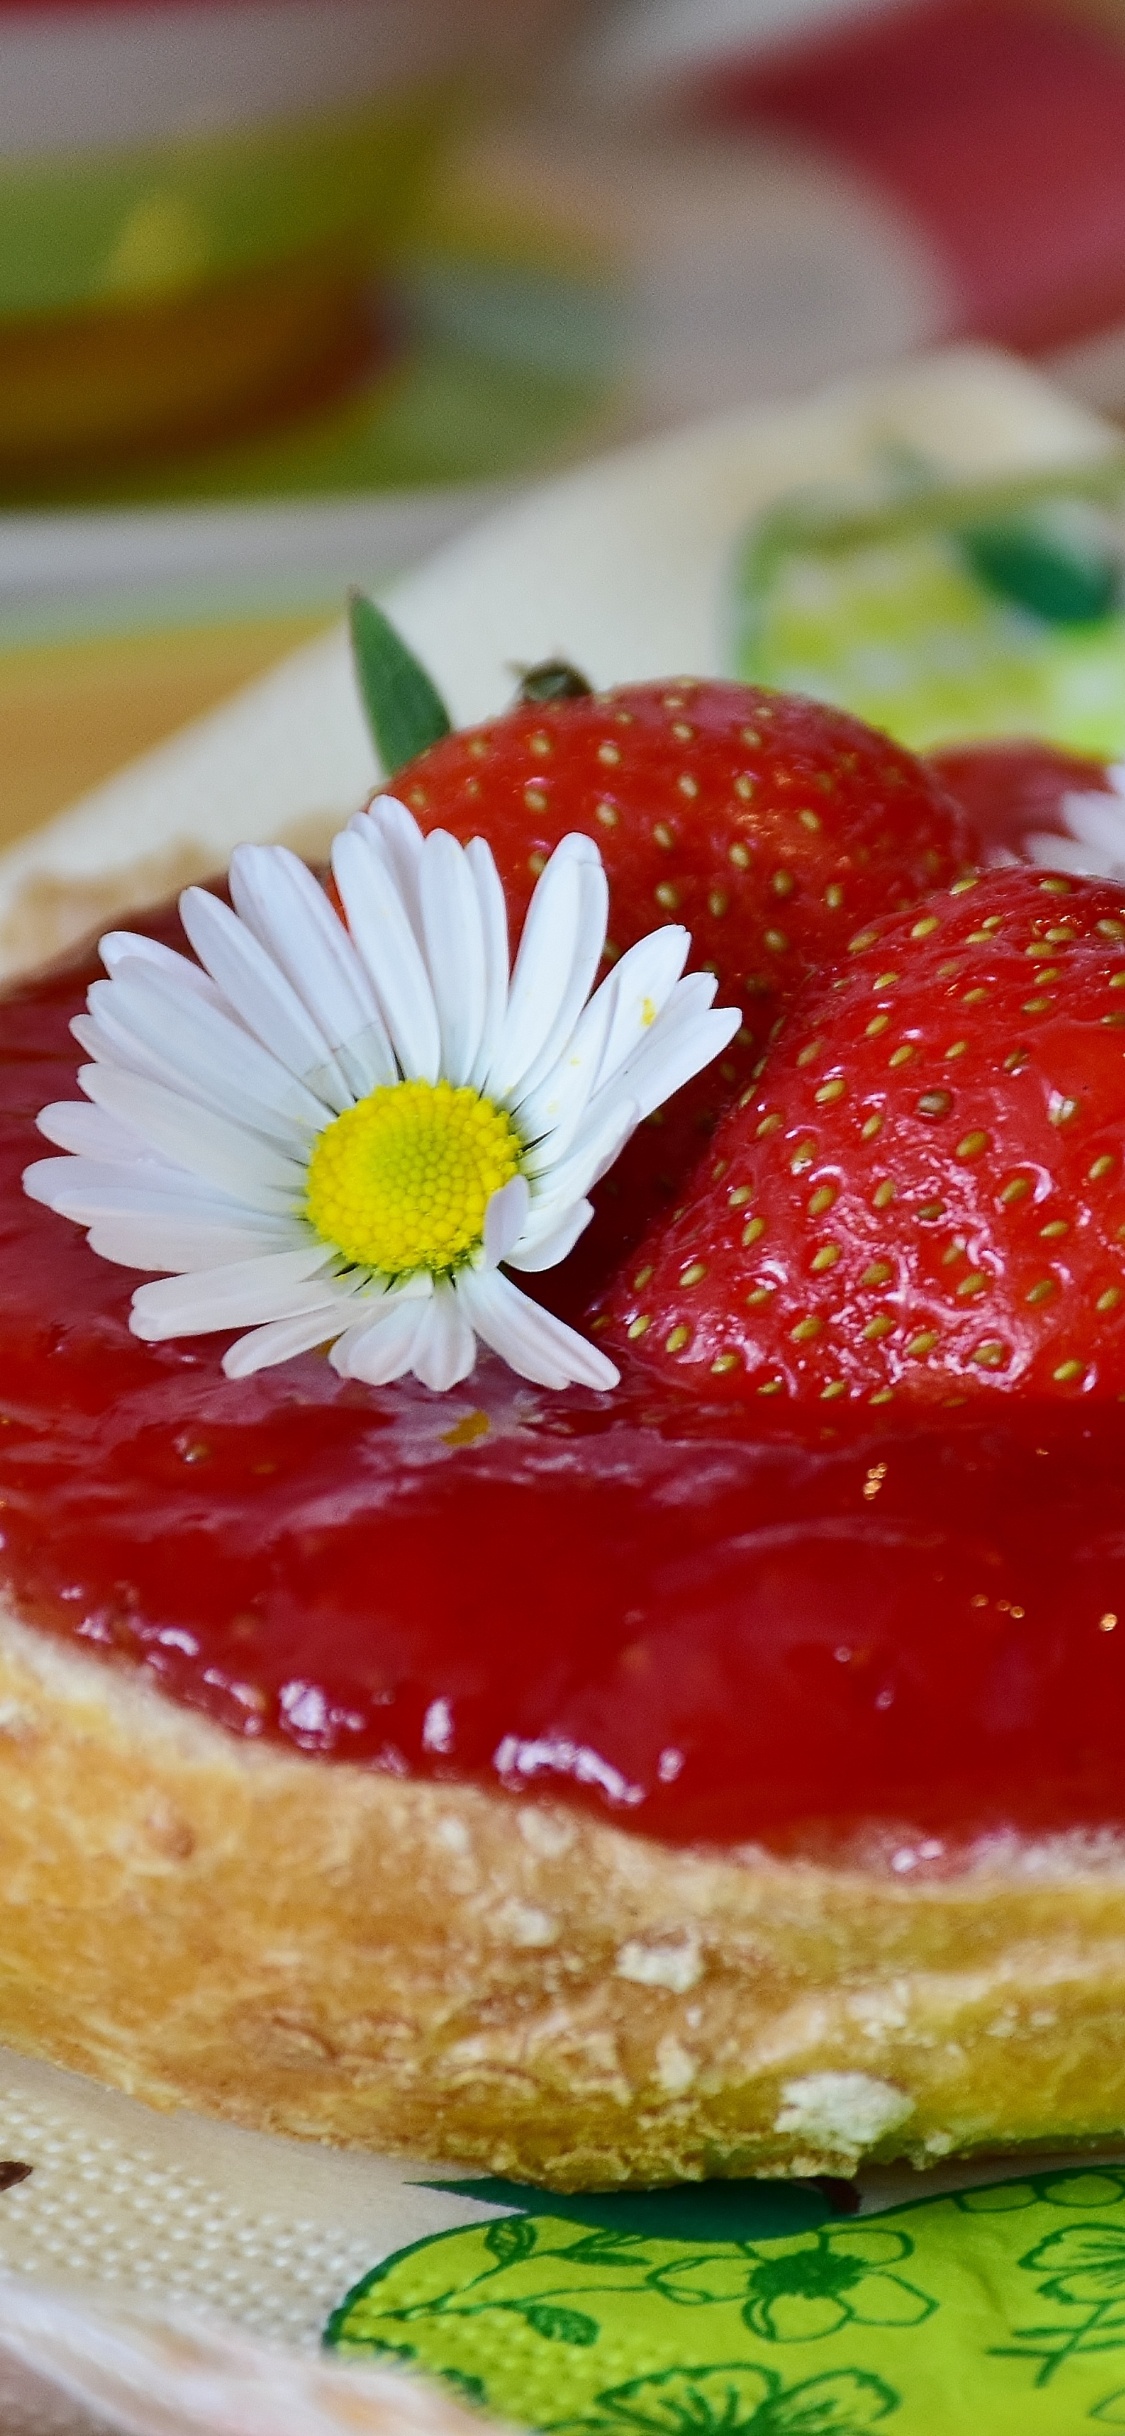 Strawberry on Bread With Cream on Top. Wallpaper in 1125x2436 Resolution